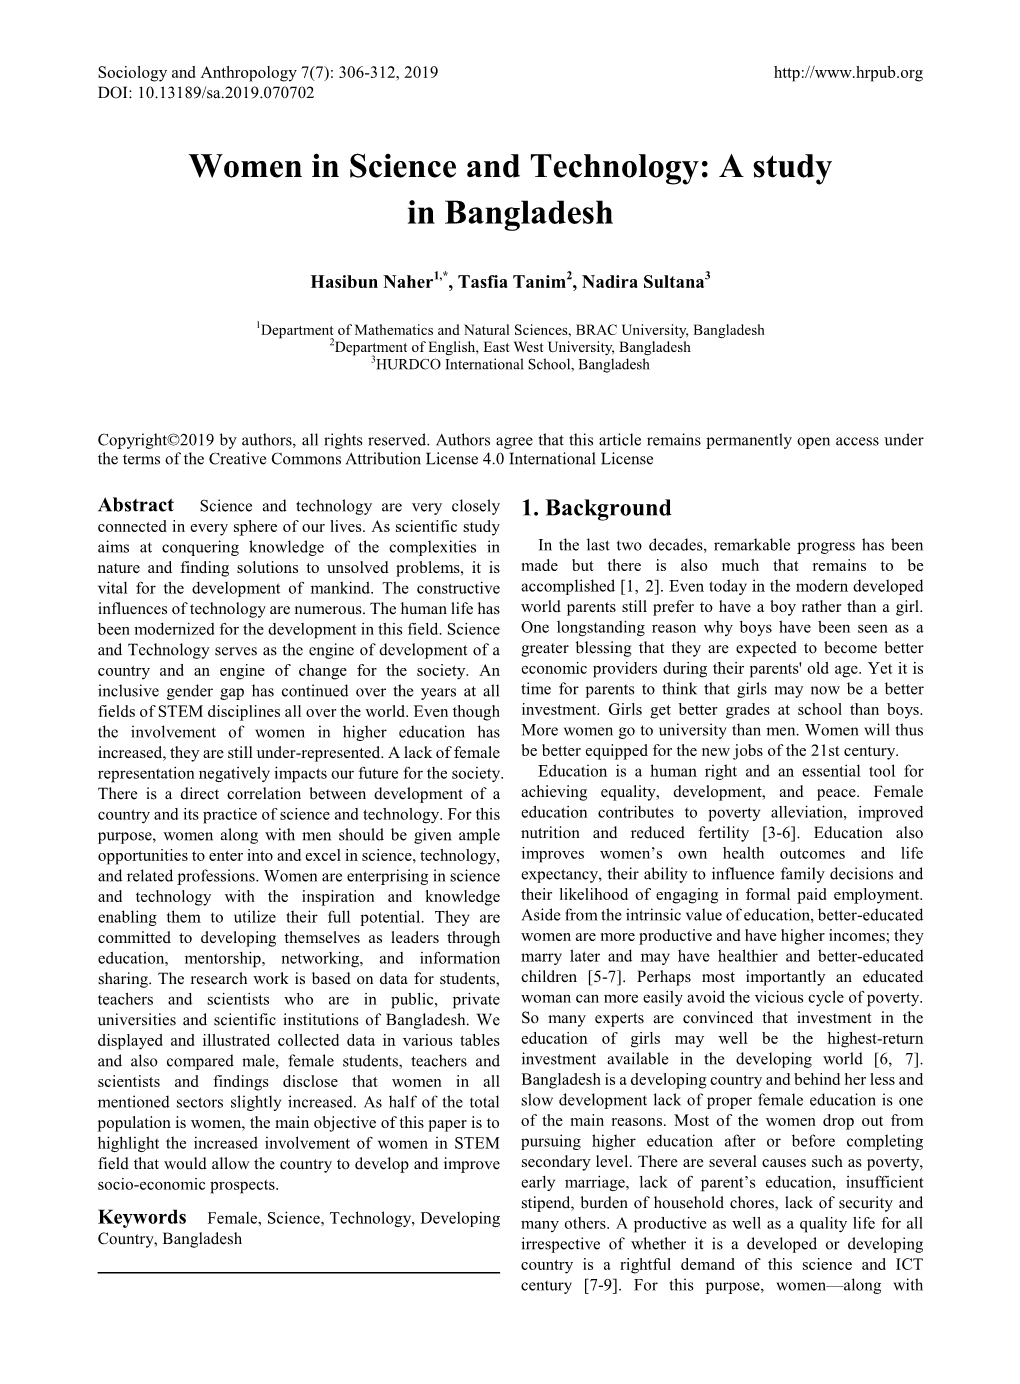 Women in Science and Technology: a Study in Bangladesh